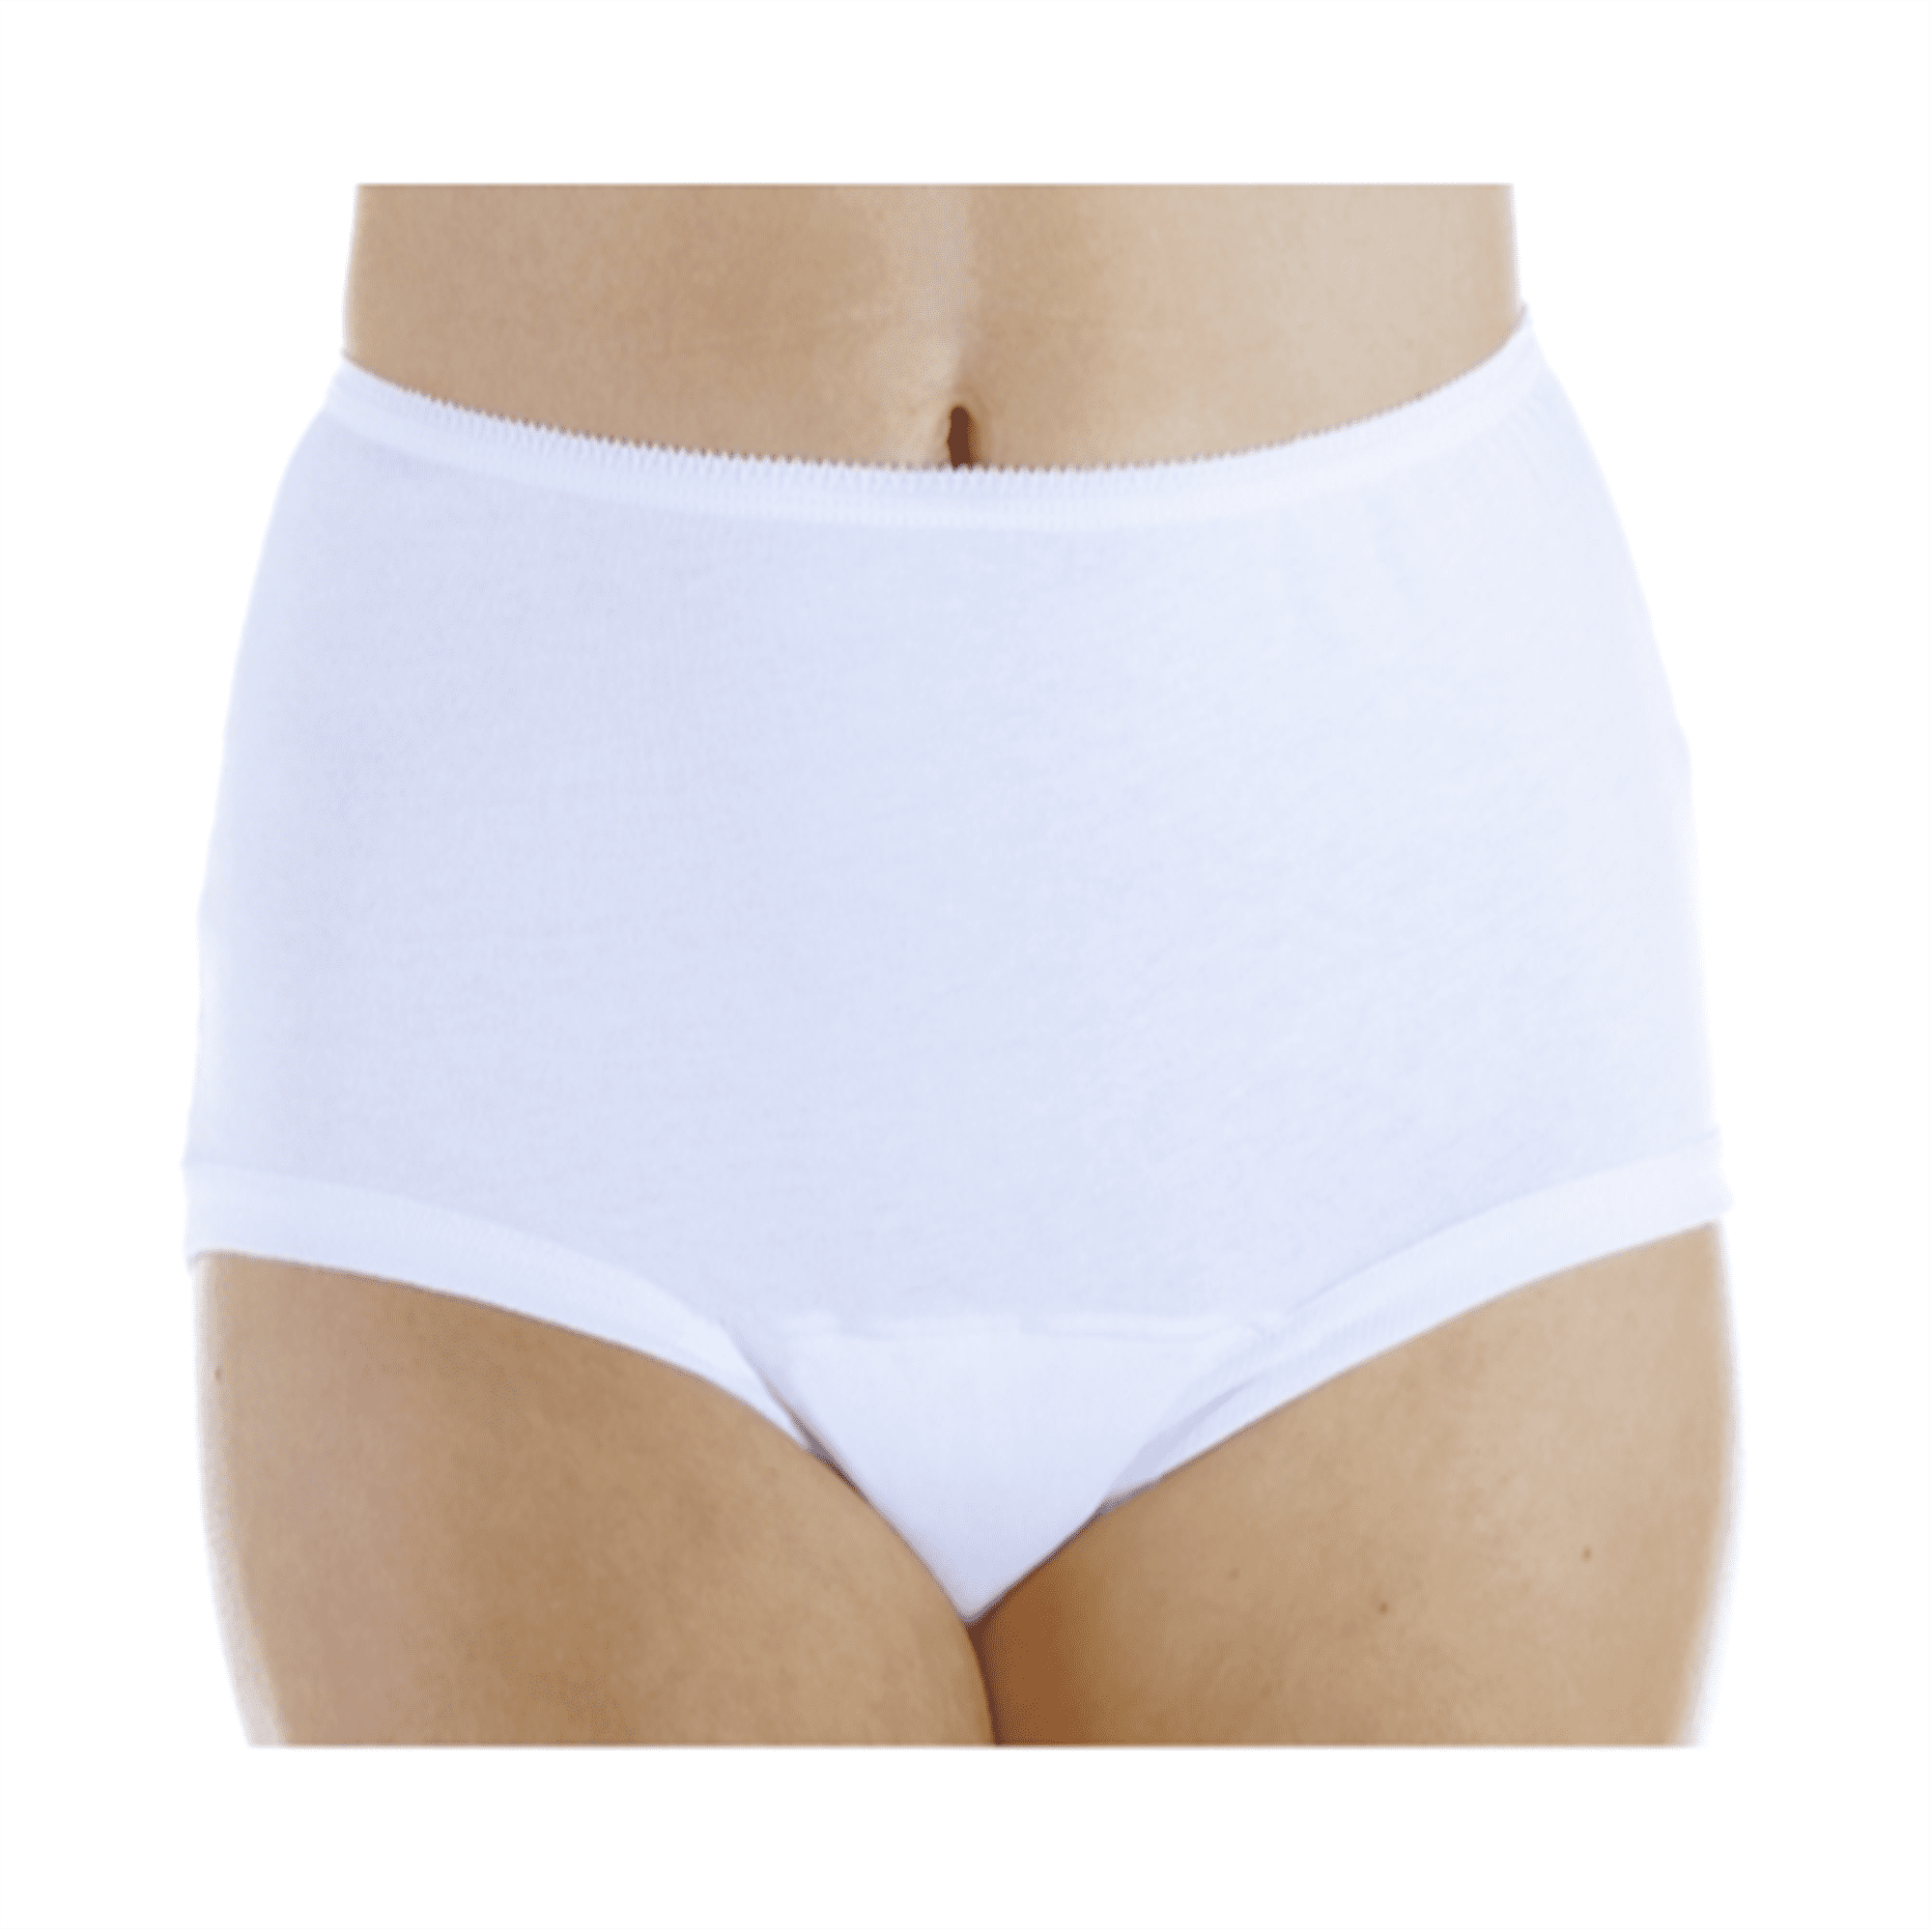 Sana Incontinence Large Pants (8) - Compare Prices & Where To Buy -  Trolley.co.uk